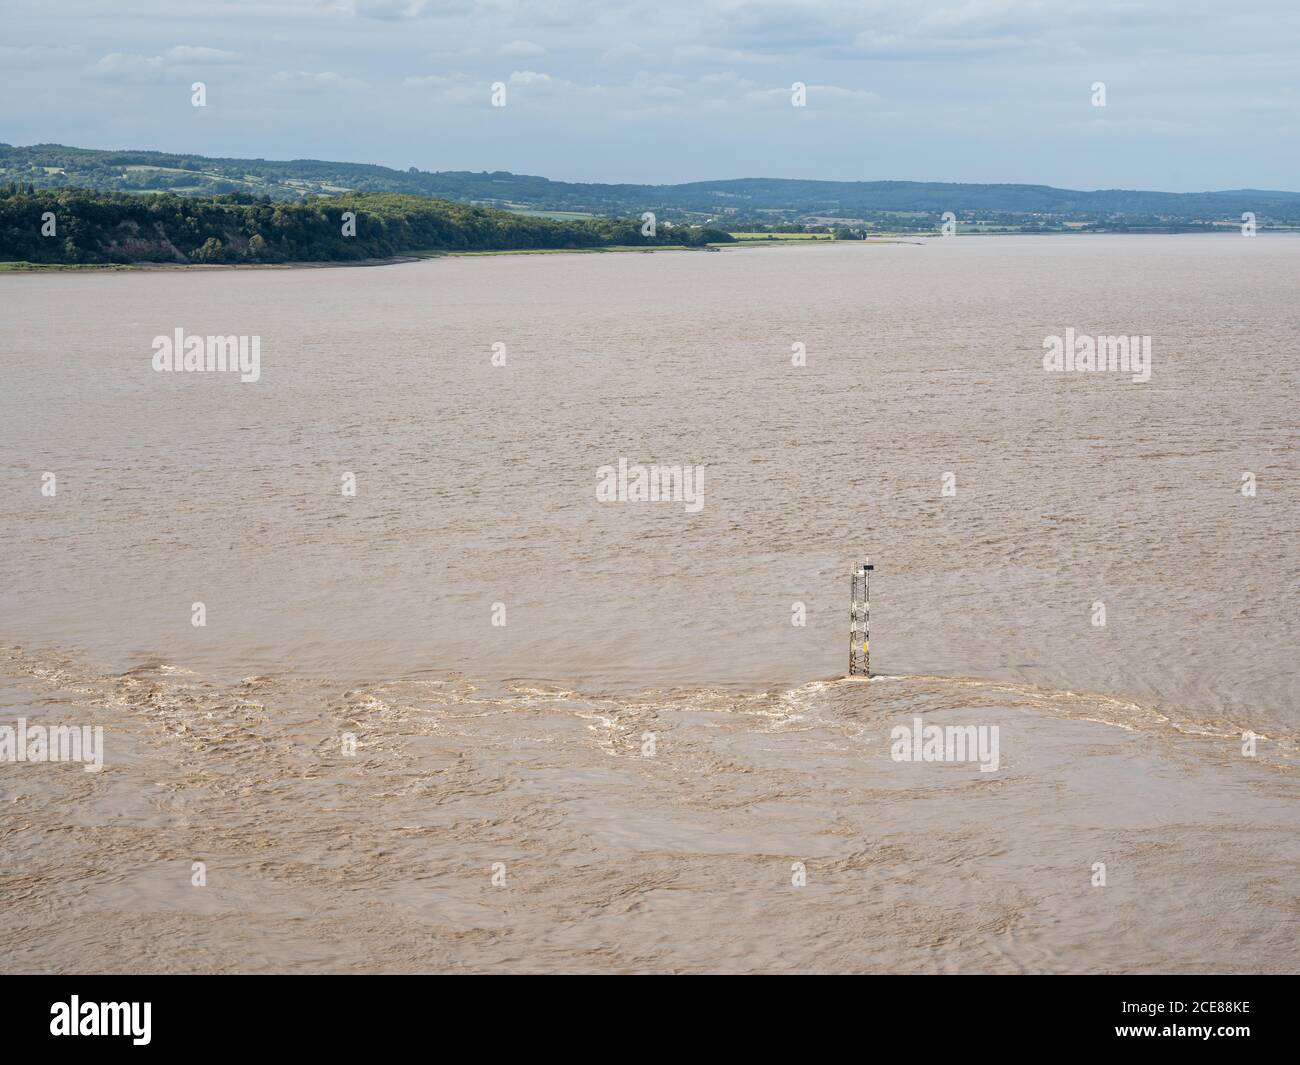 The Forest of Dean and River Severn Estuary seen from the Severn Bridge in Gloucestershire. Stock Photo